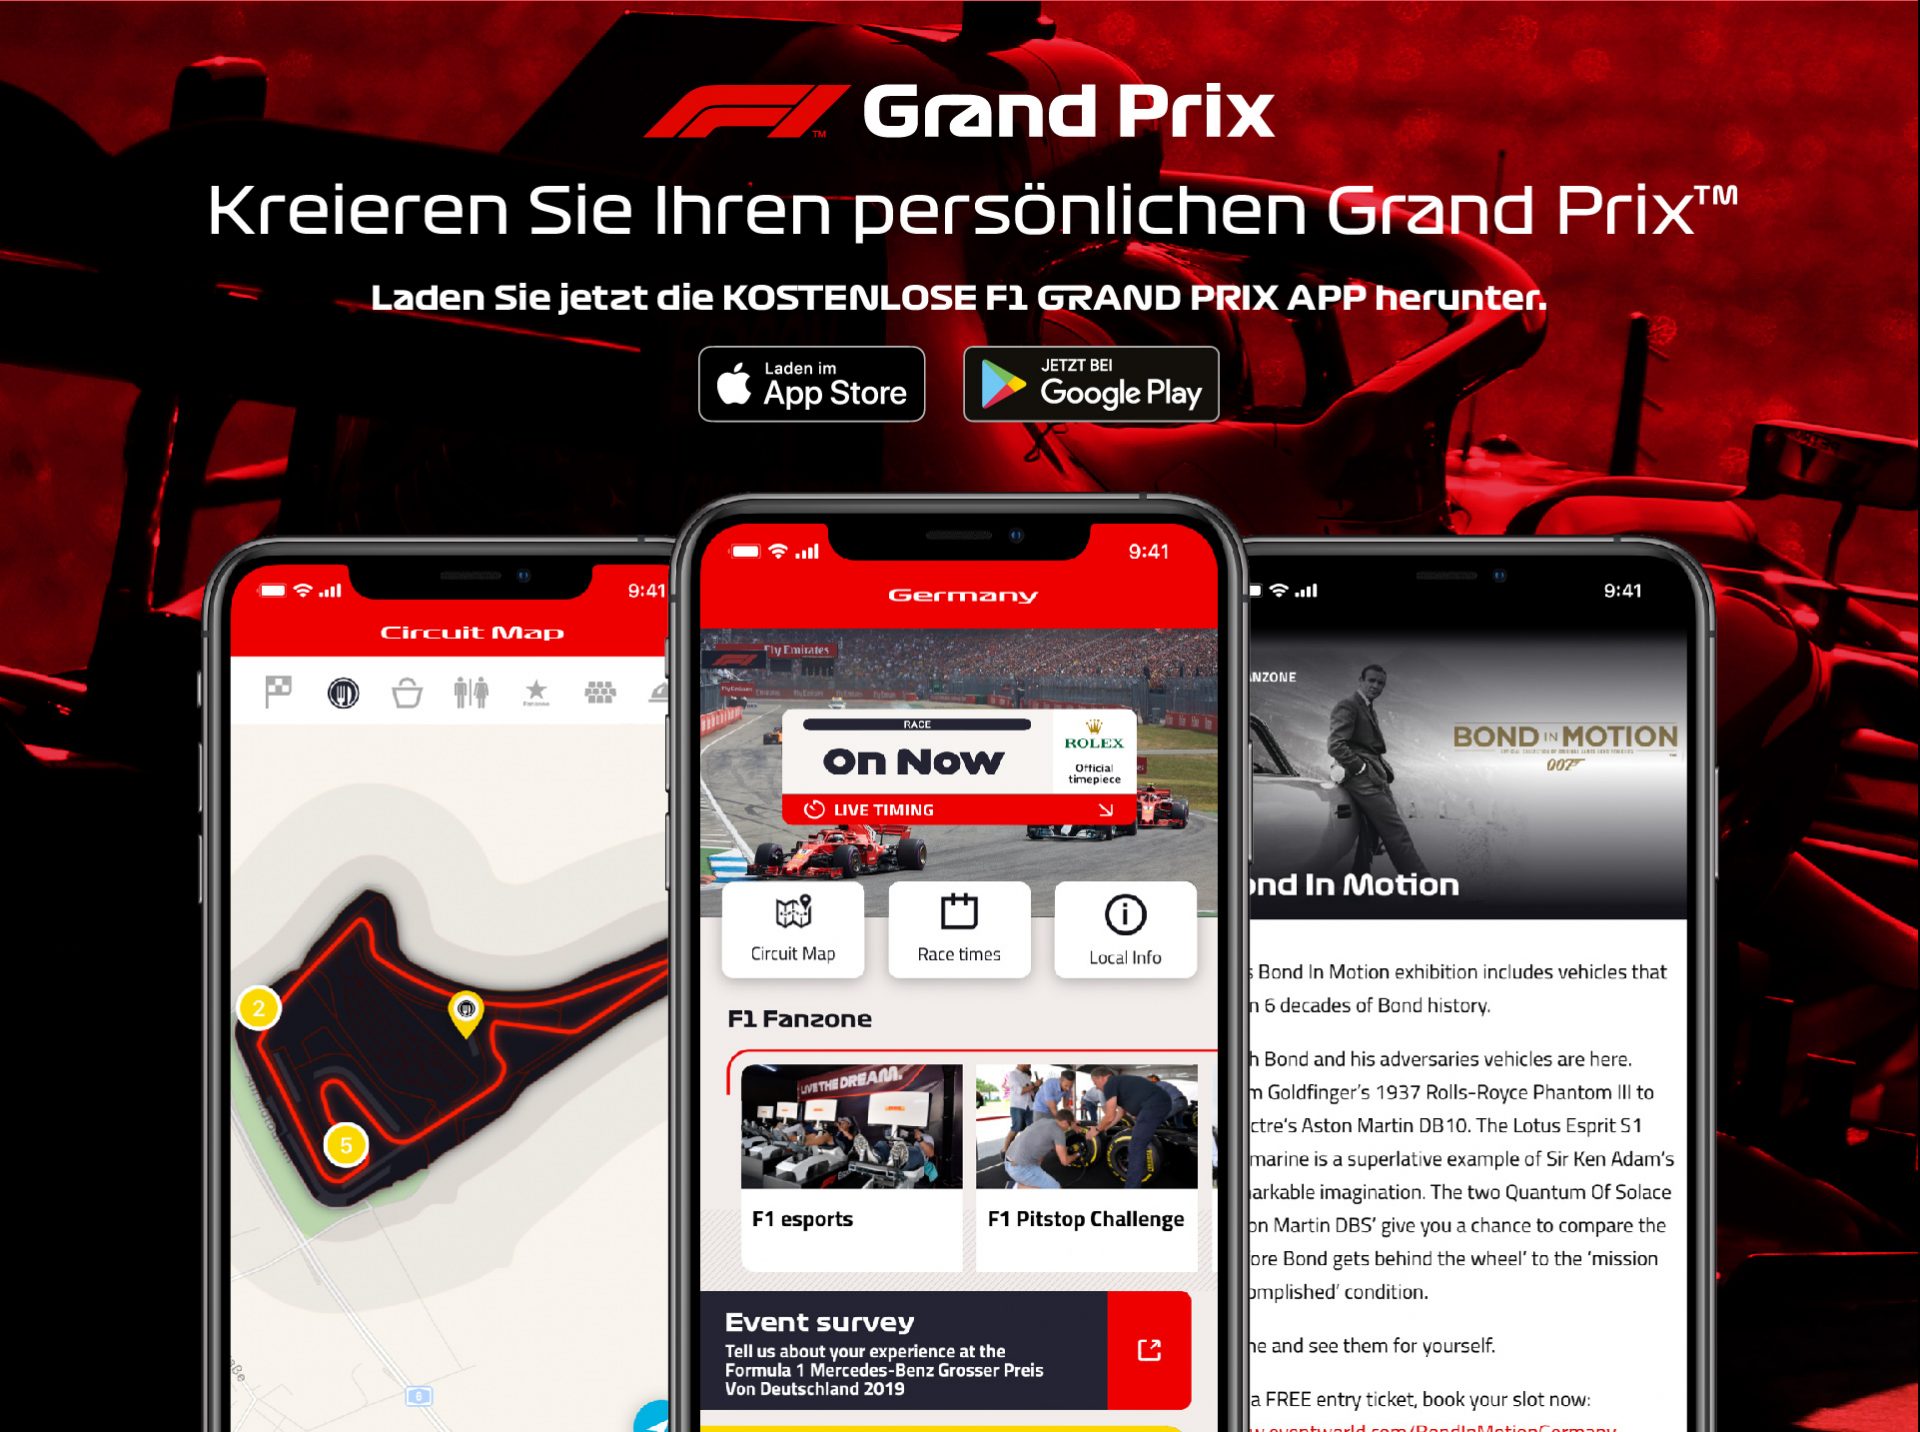 Up to date with the F1 Grand Prix App